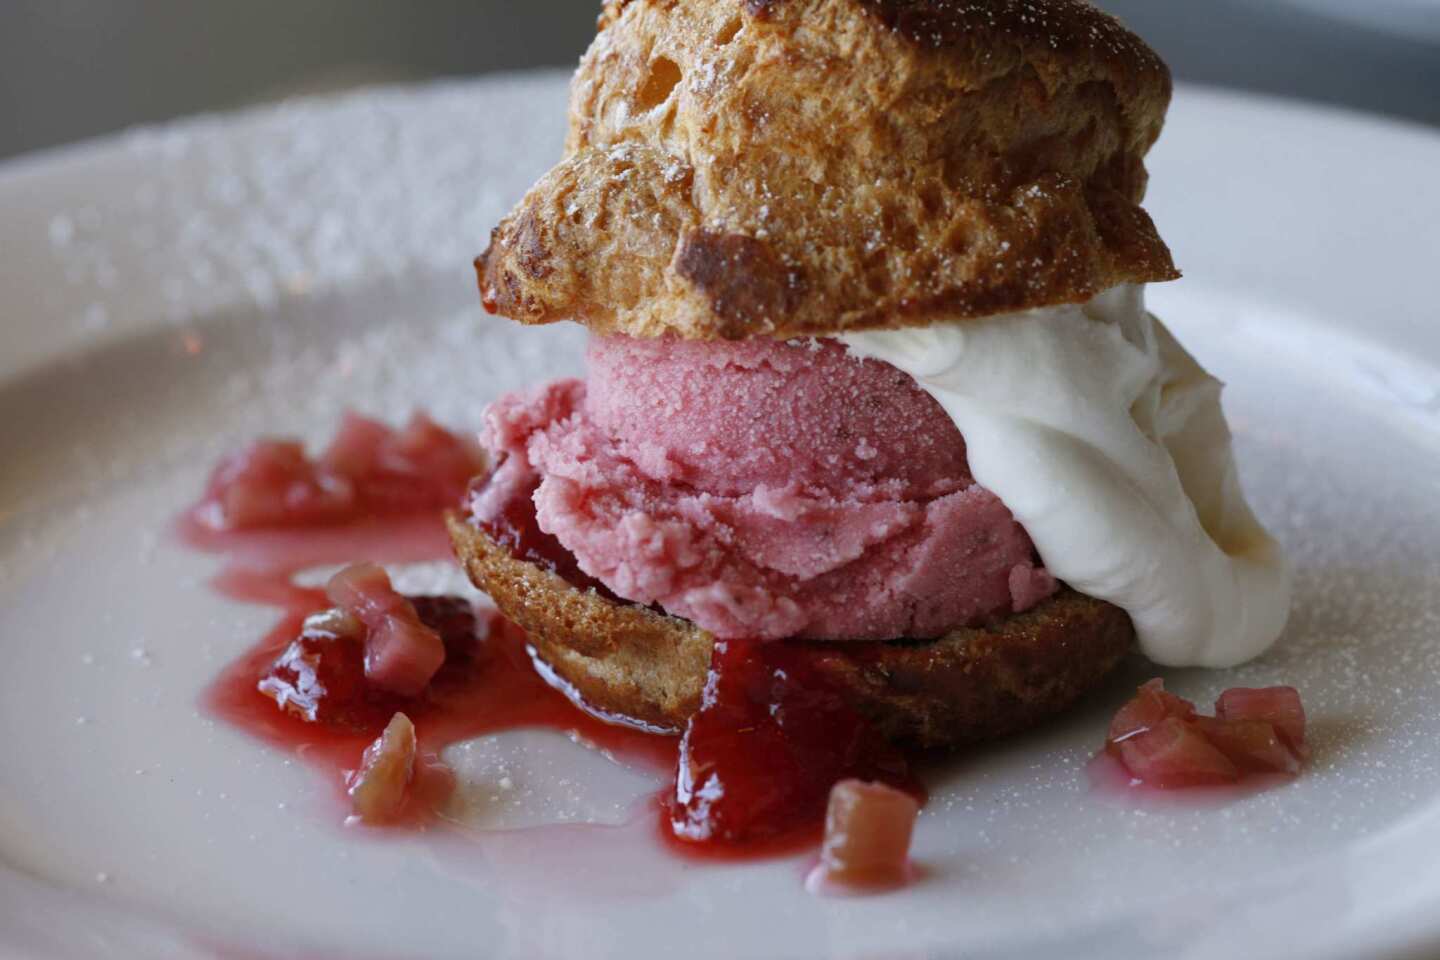 A strawberry rhubarb ice cream profiterole with strawberries and whipped cream.